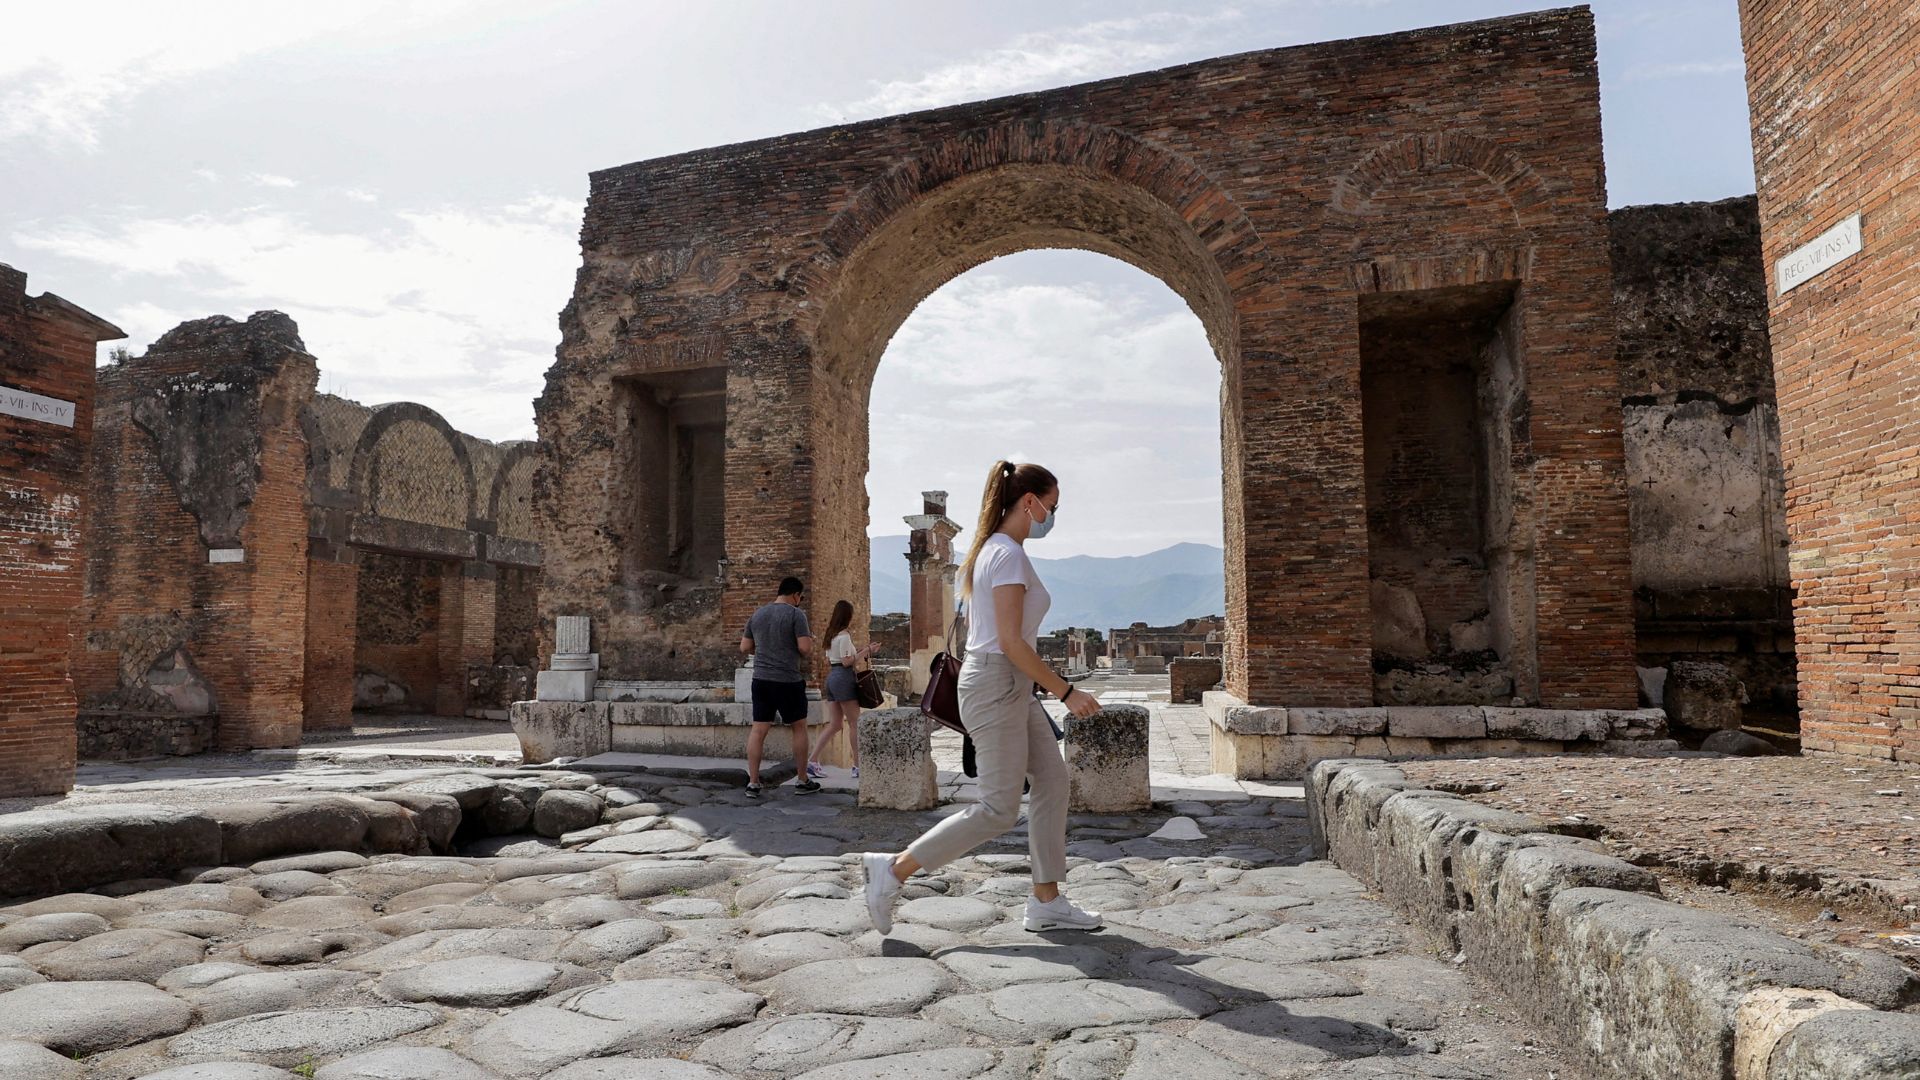 The ruins of Pompeii attract millions of tourists each year. /Ciro de Luca/Reuters